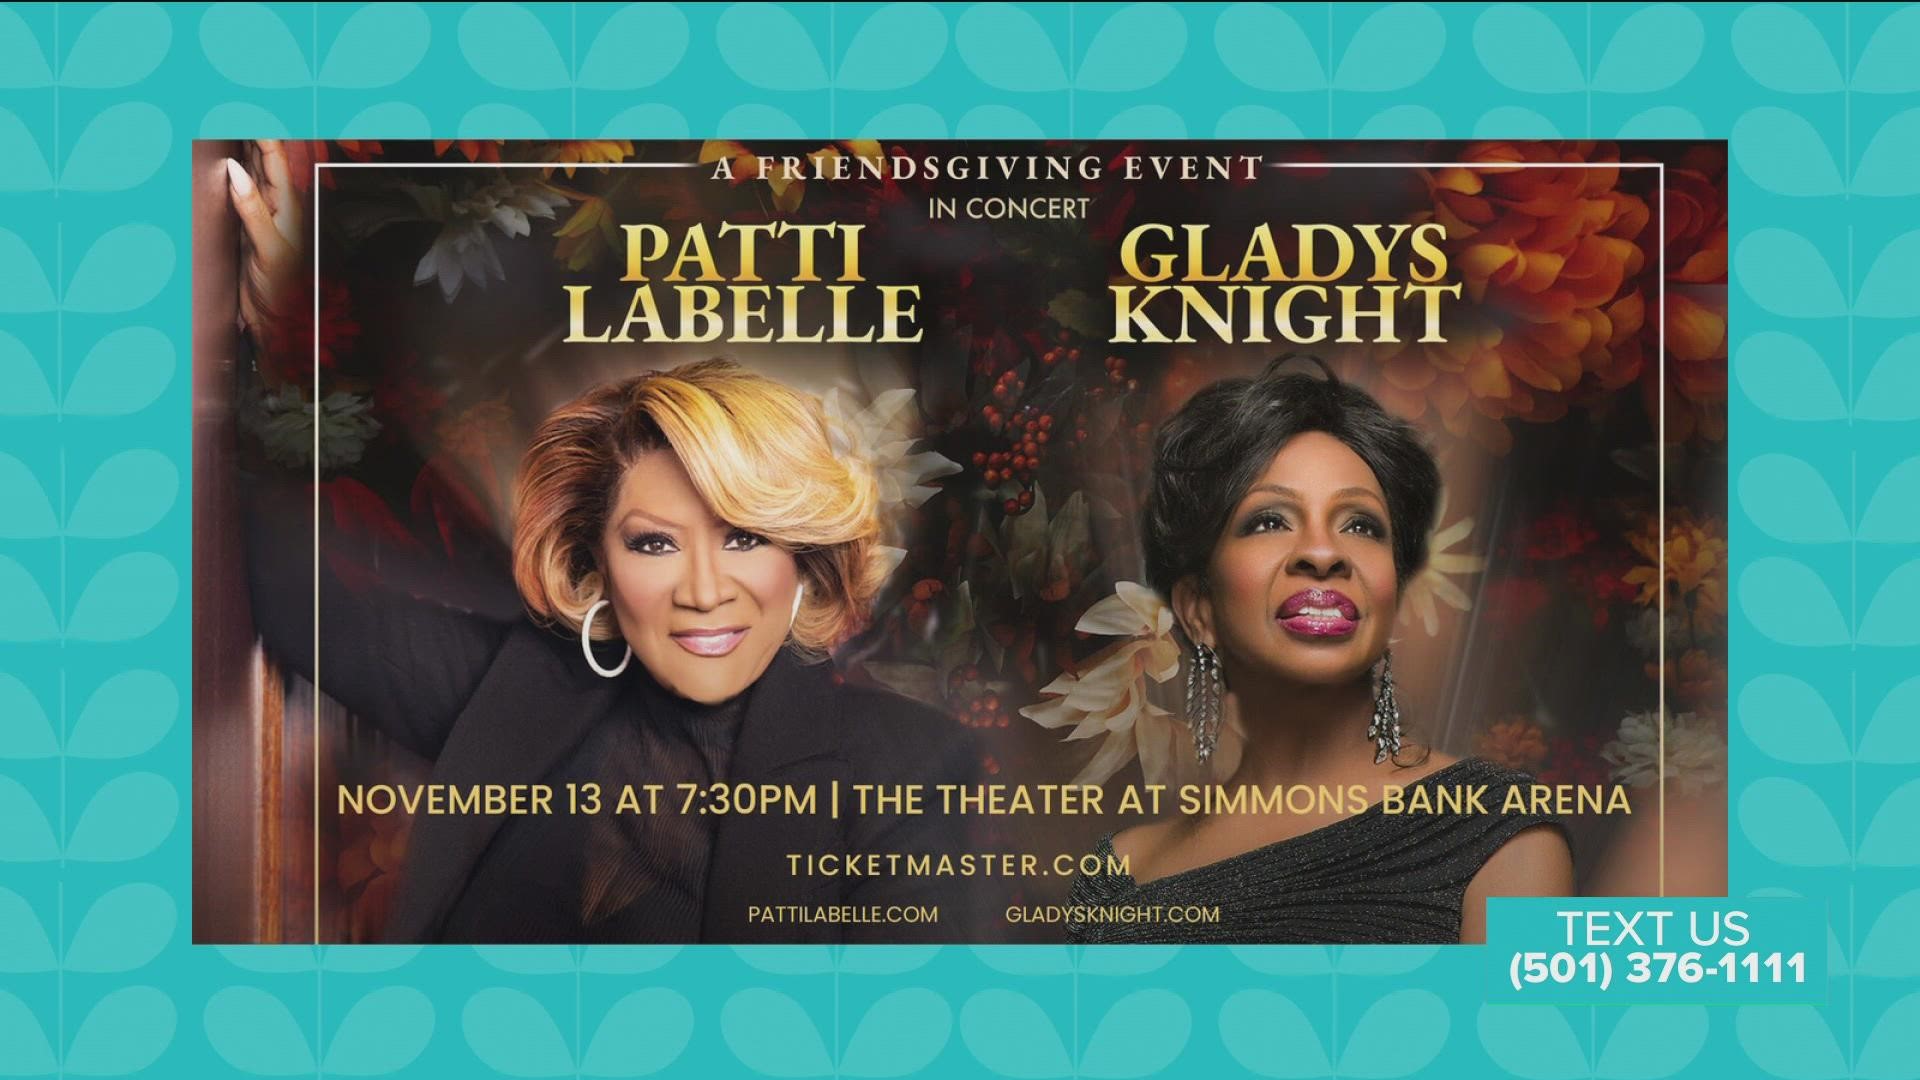 Patti LaBelle & Gladys Knight coming to Simmons Bank Arena